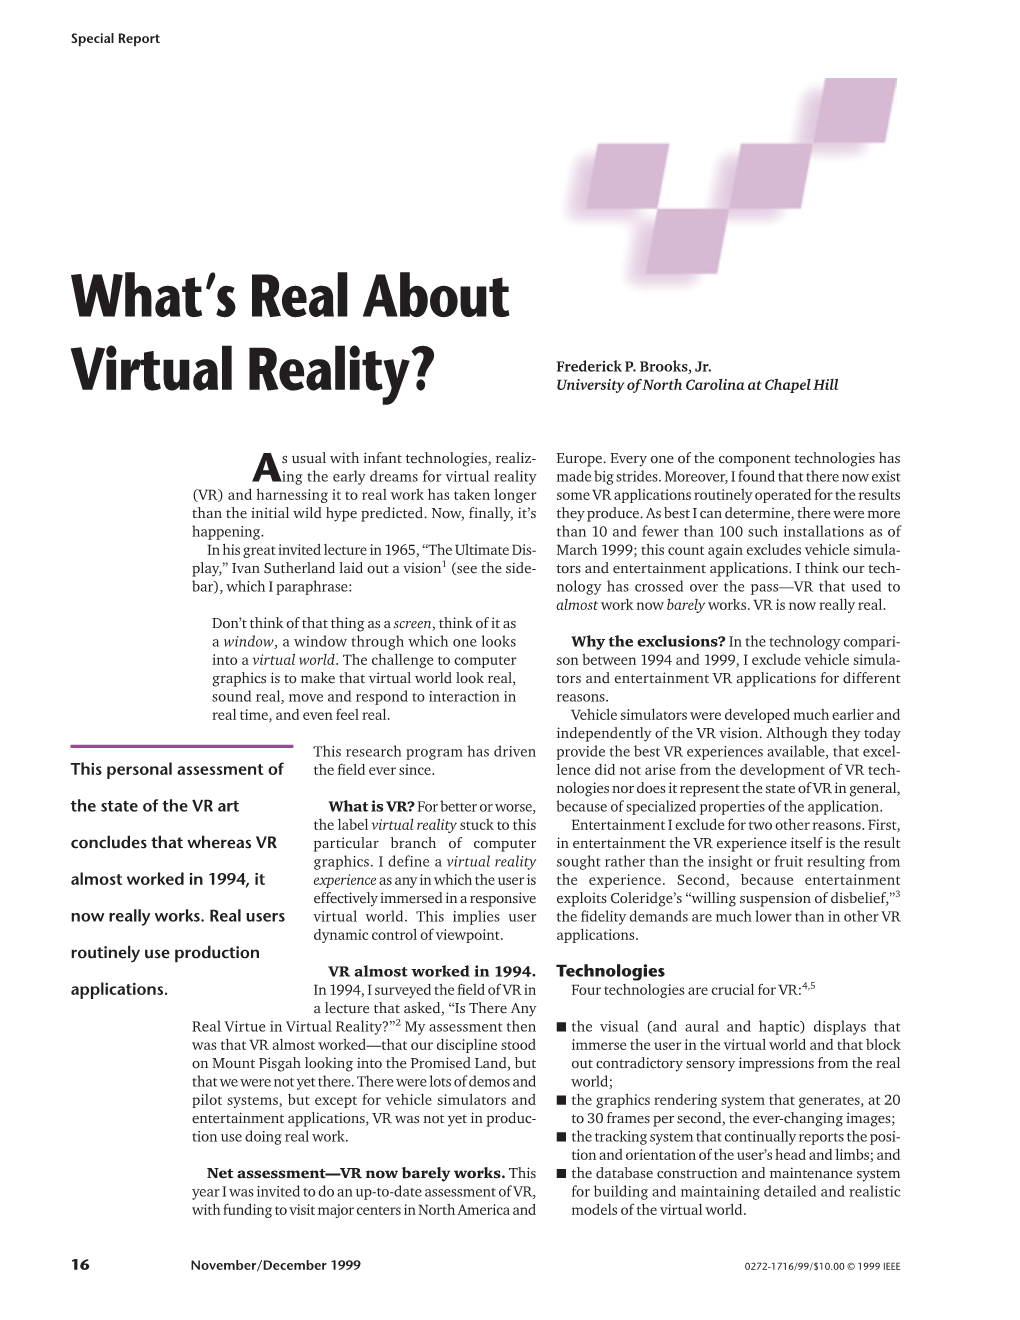 What's Real About Virtual Reality?